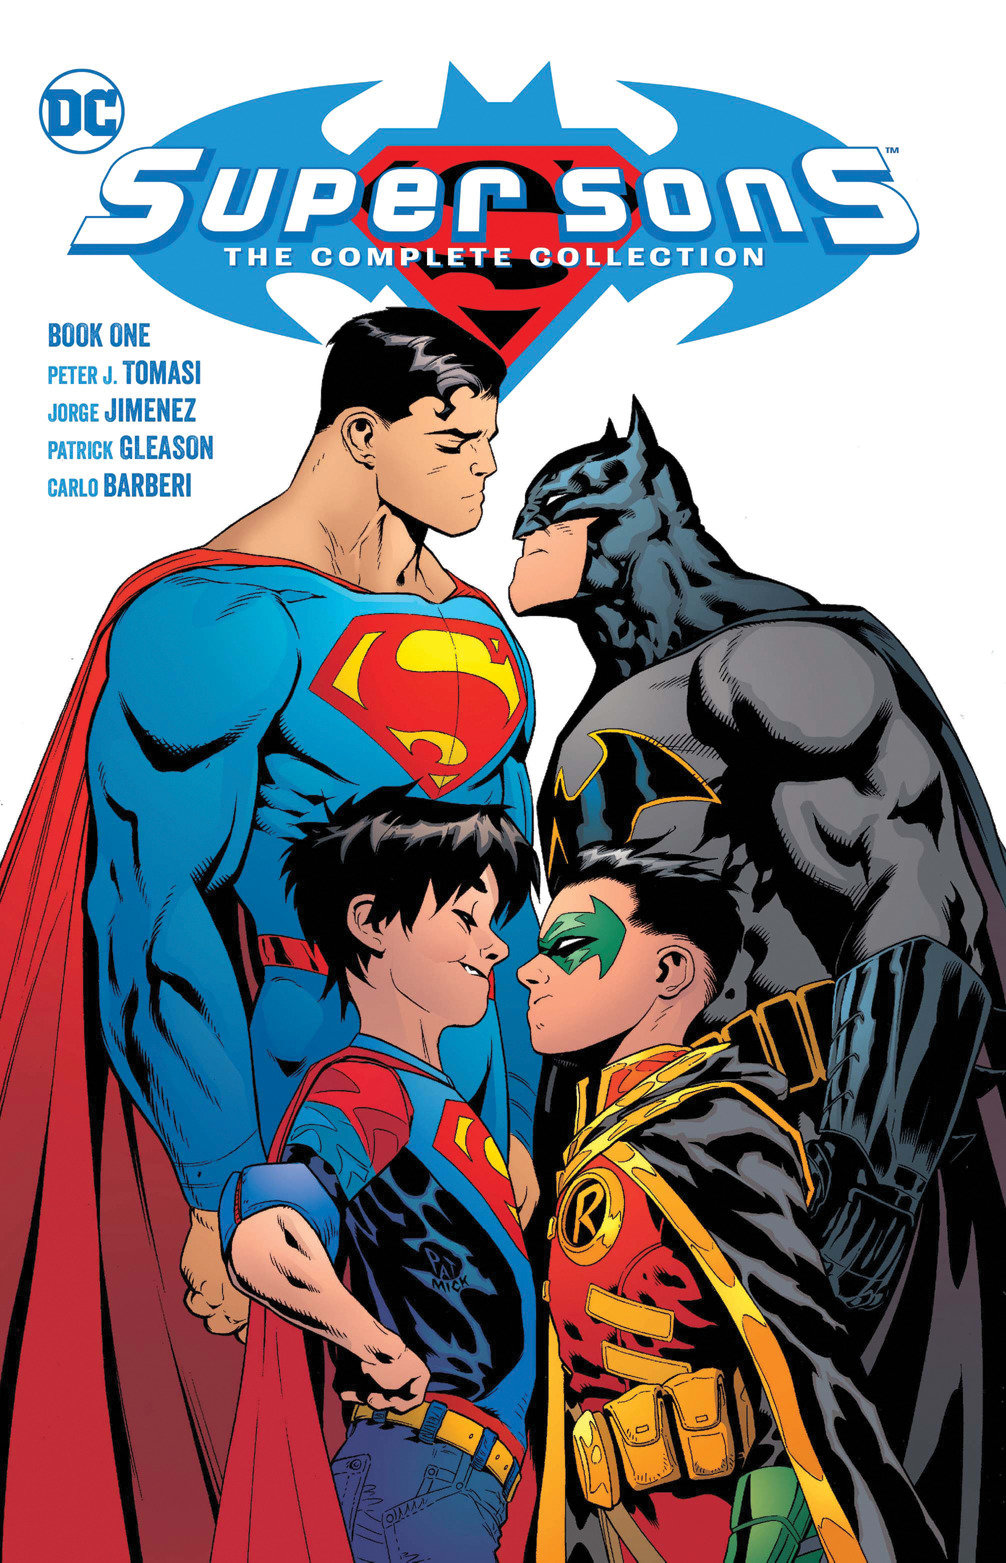 Super Sons the Complete Collection Graphic Novel Volume 1